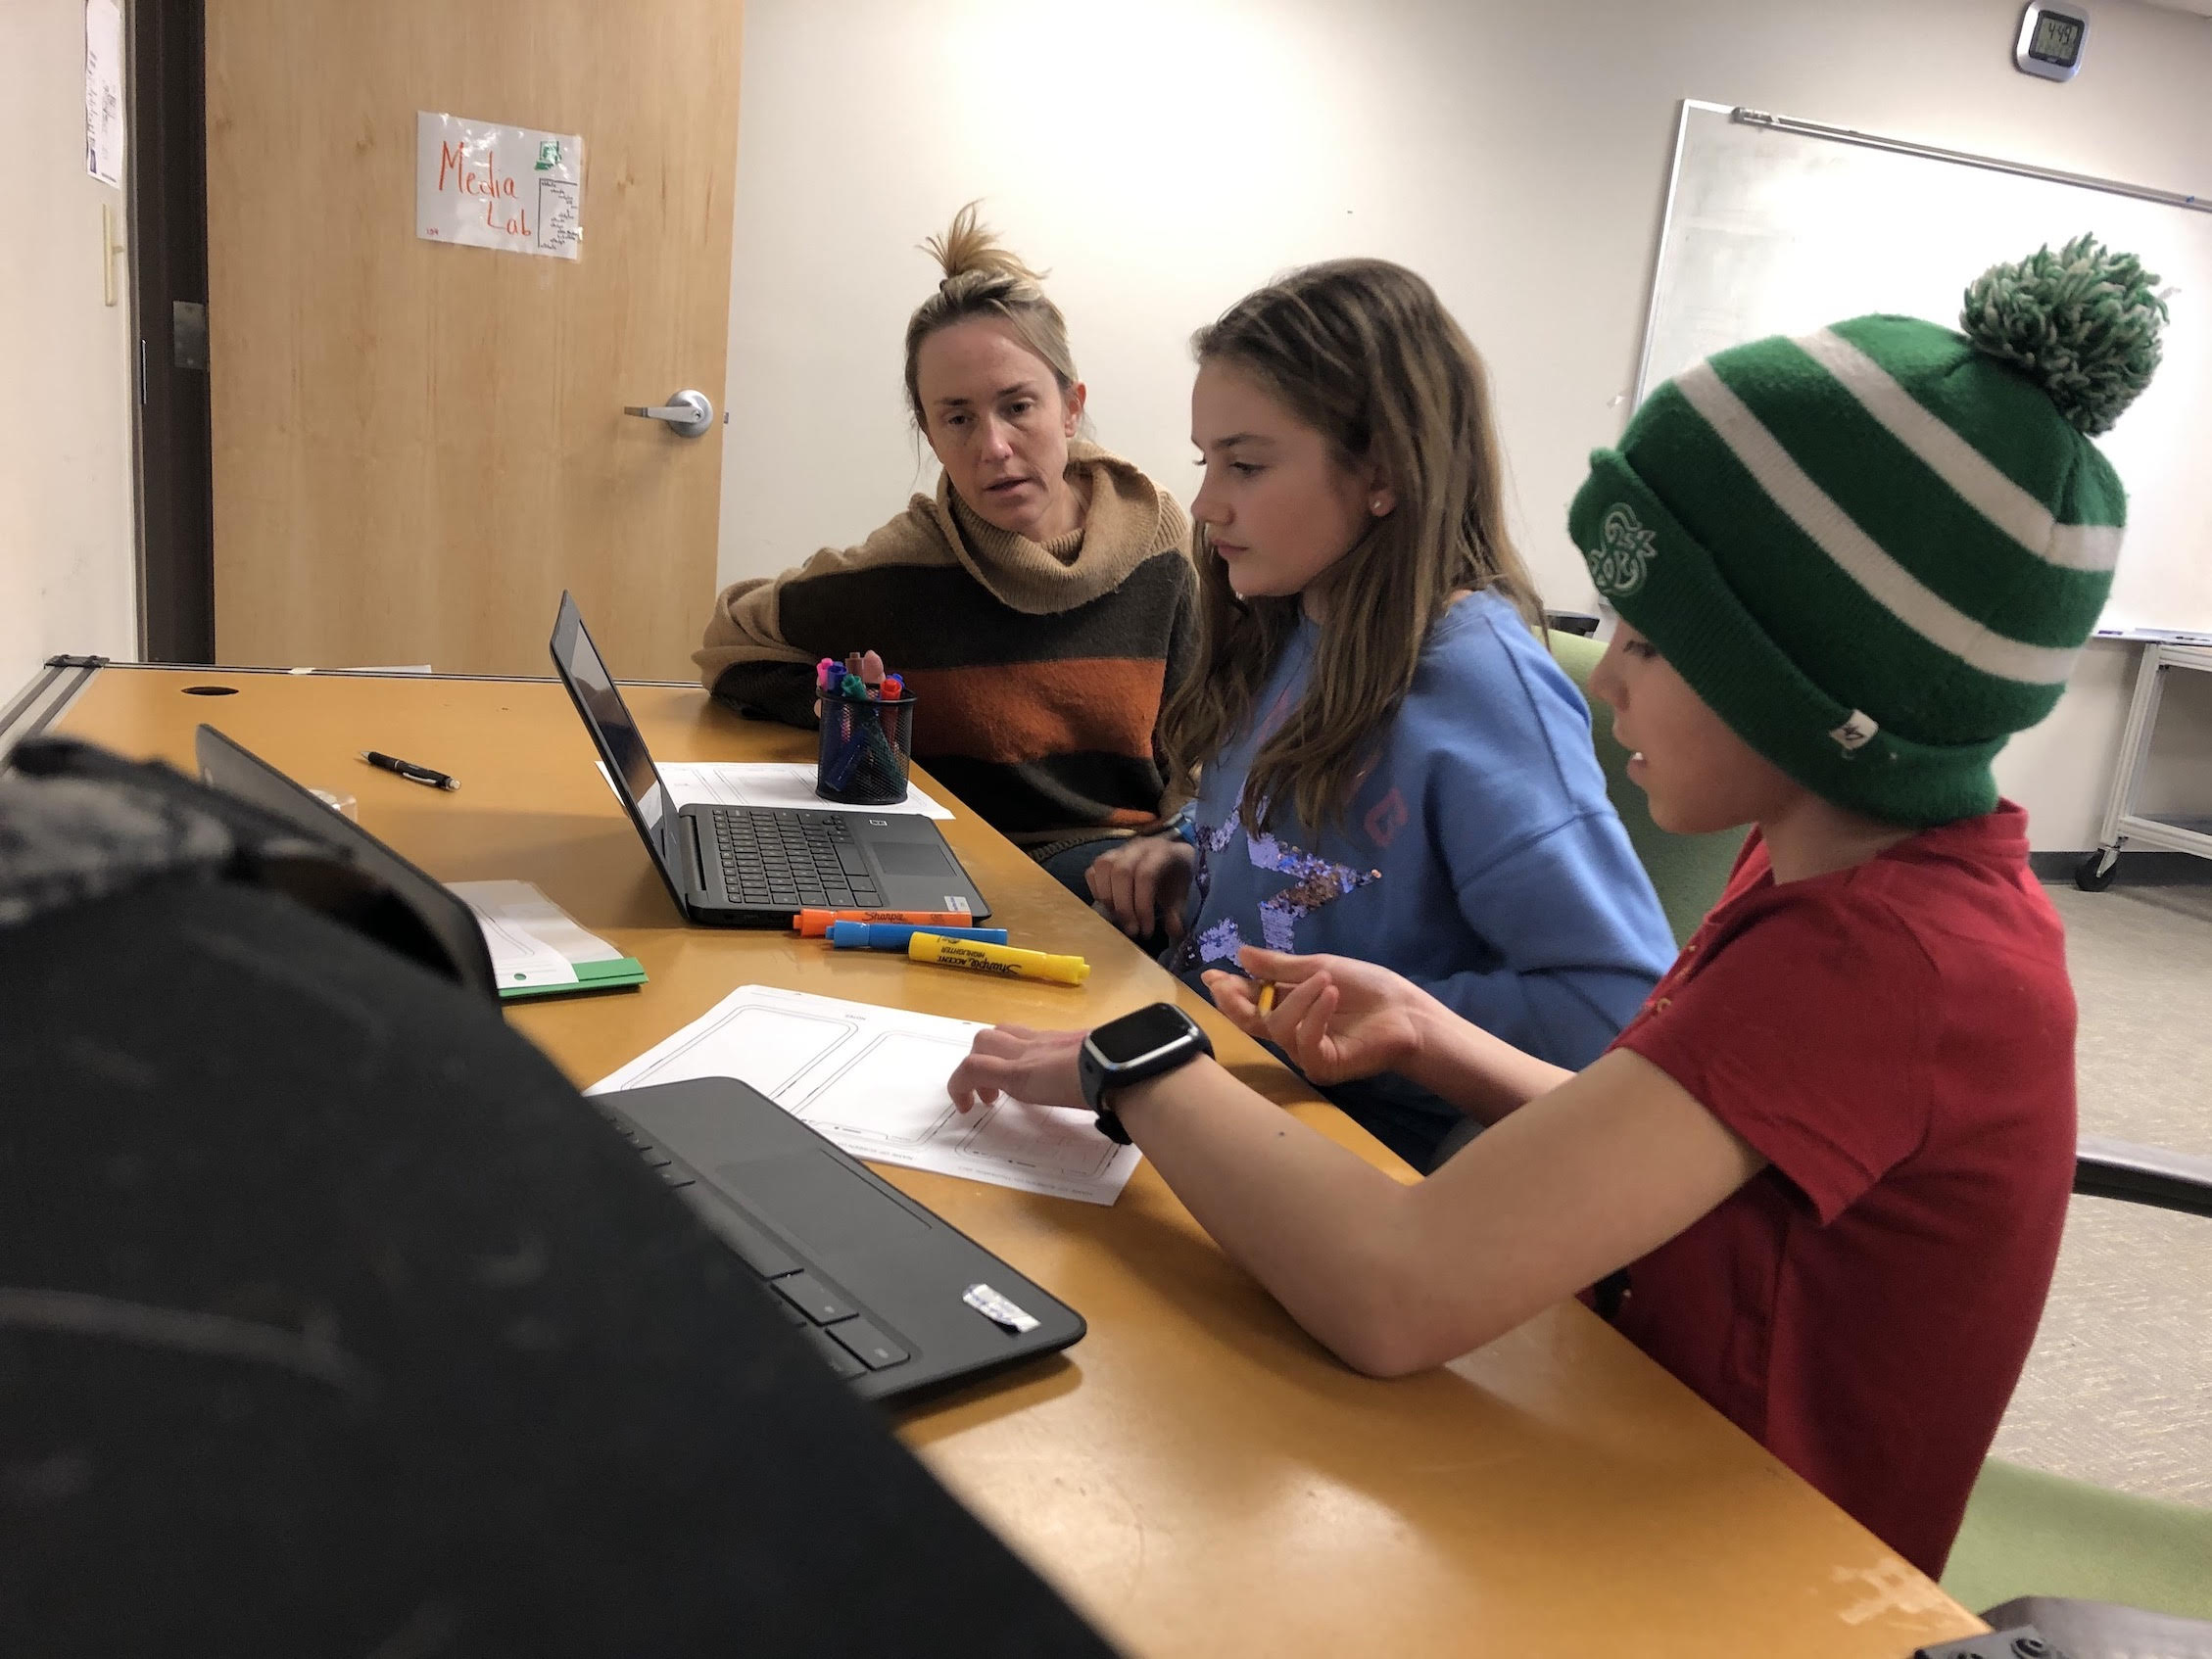 A young woman mentors two young girls at a desk with two laptops